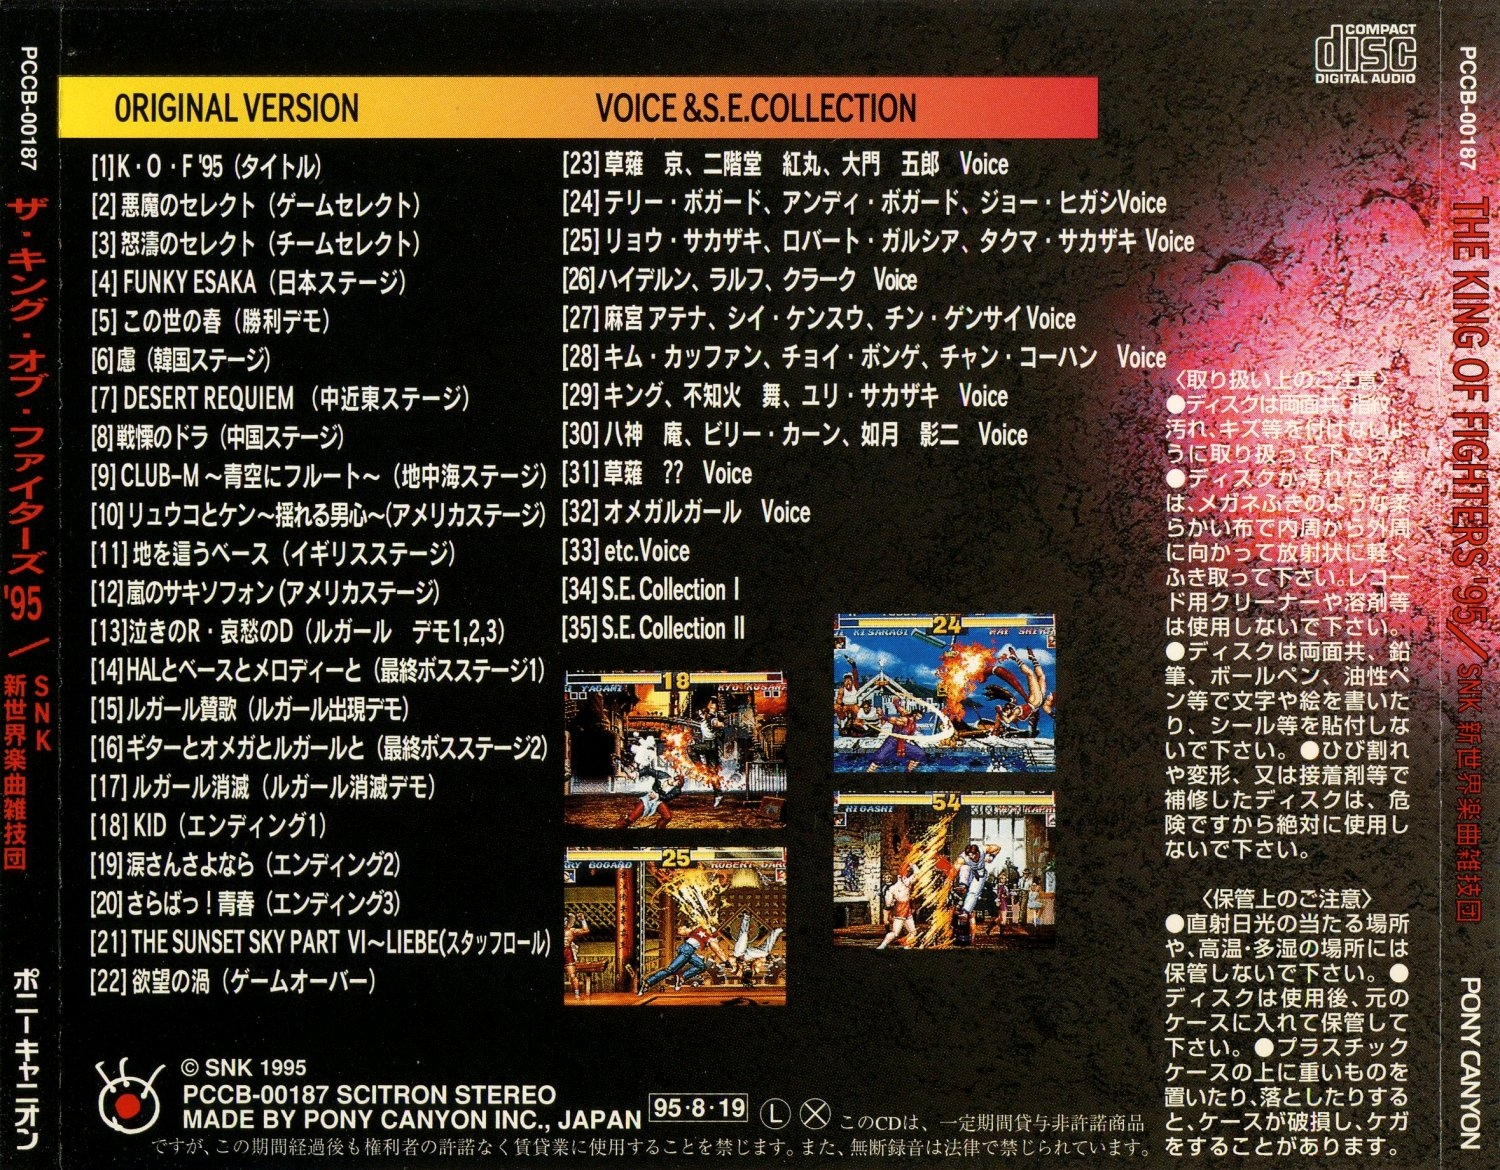 The King of Fighters 2002 - The Definitive Soundtrack - CD